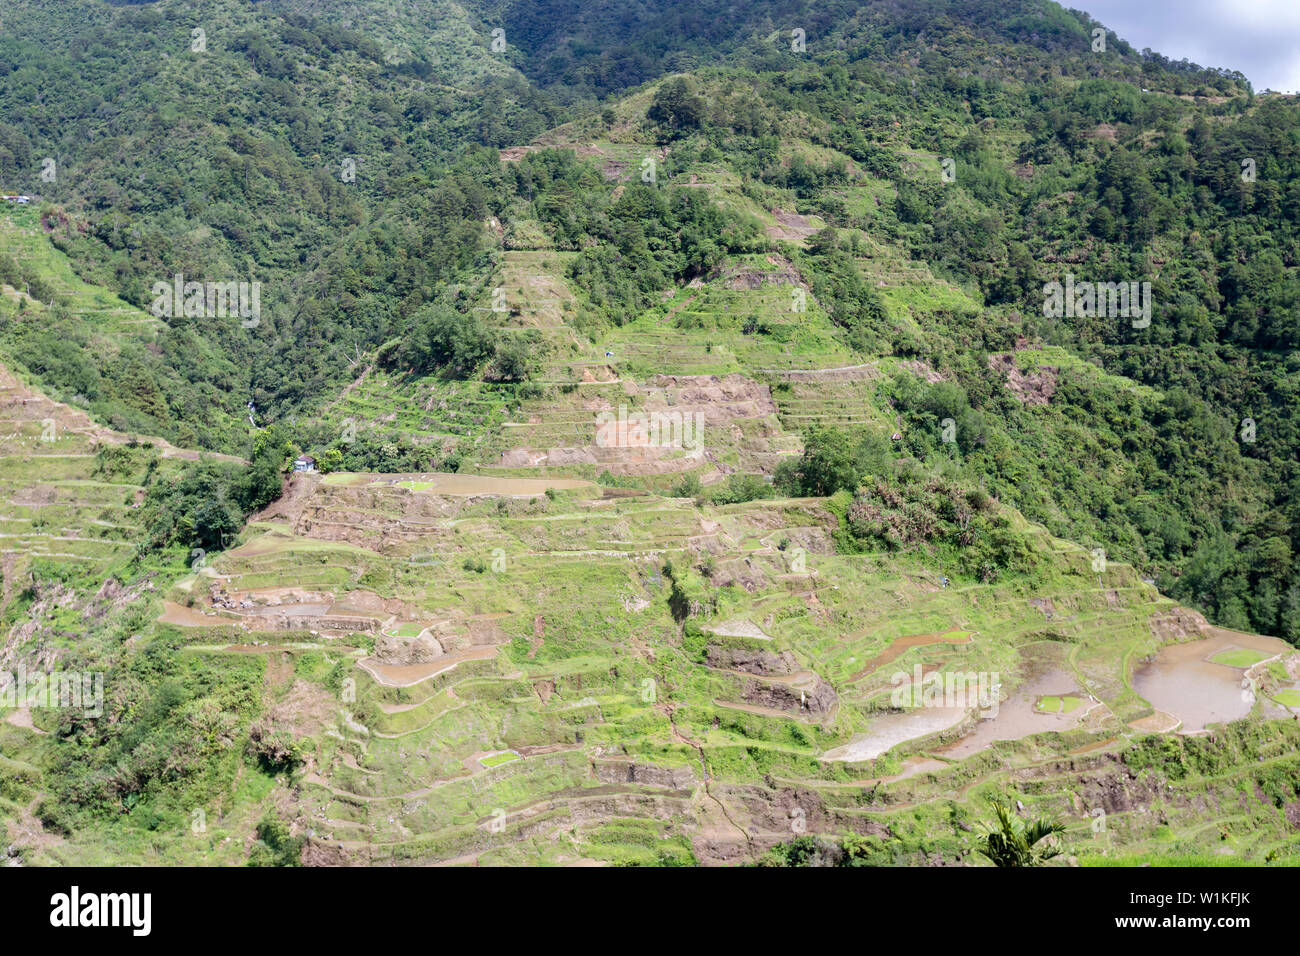 View of the rice terraces as seen from the Banaue viewpoint, Banaue, Philippines Stock Photo